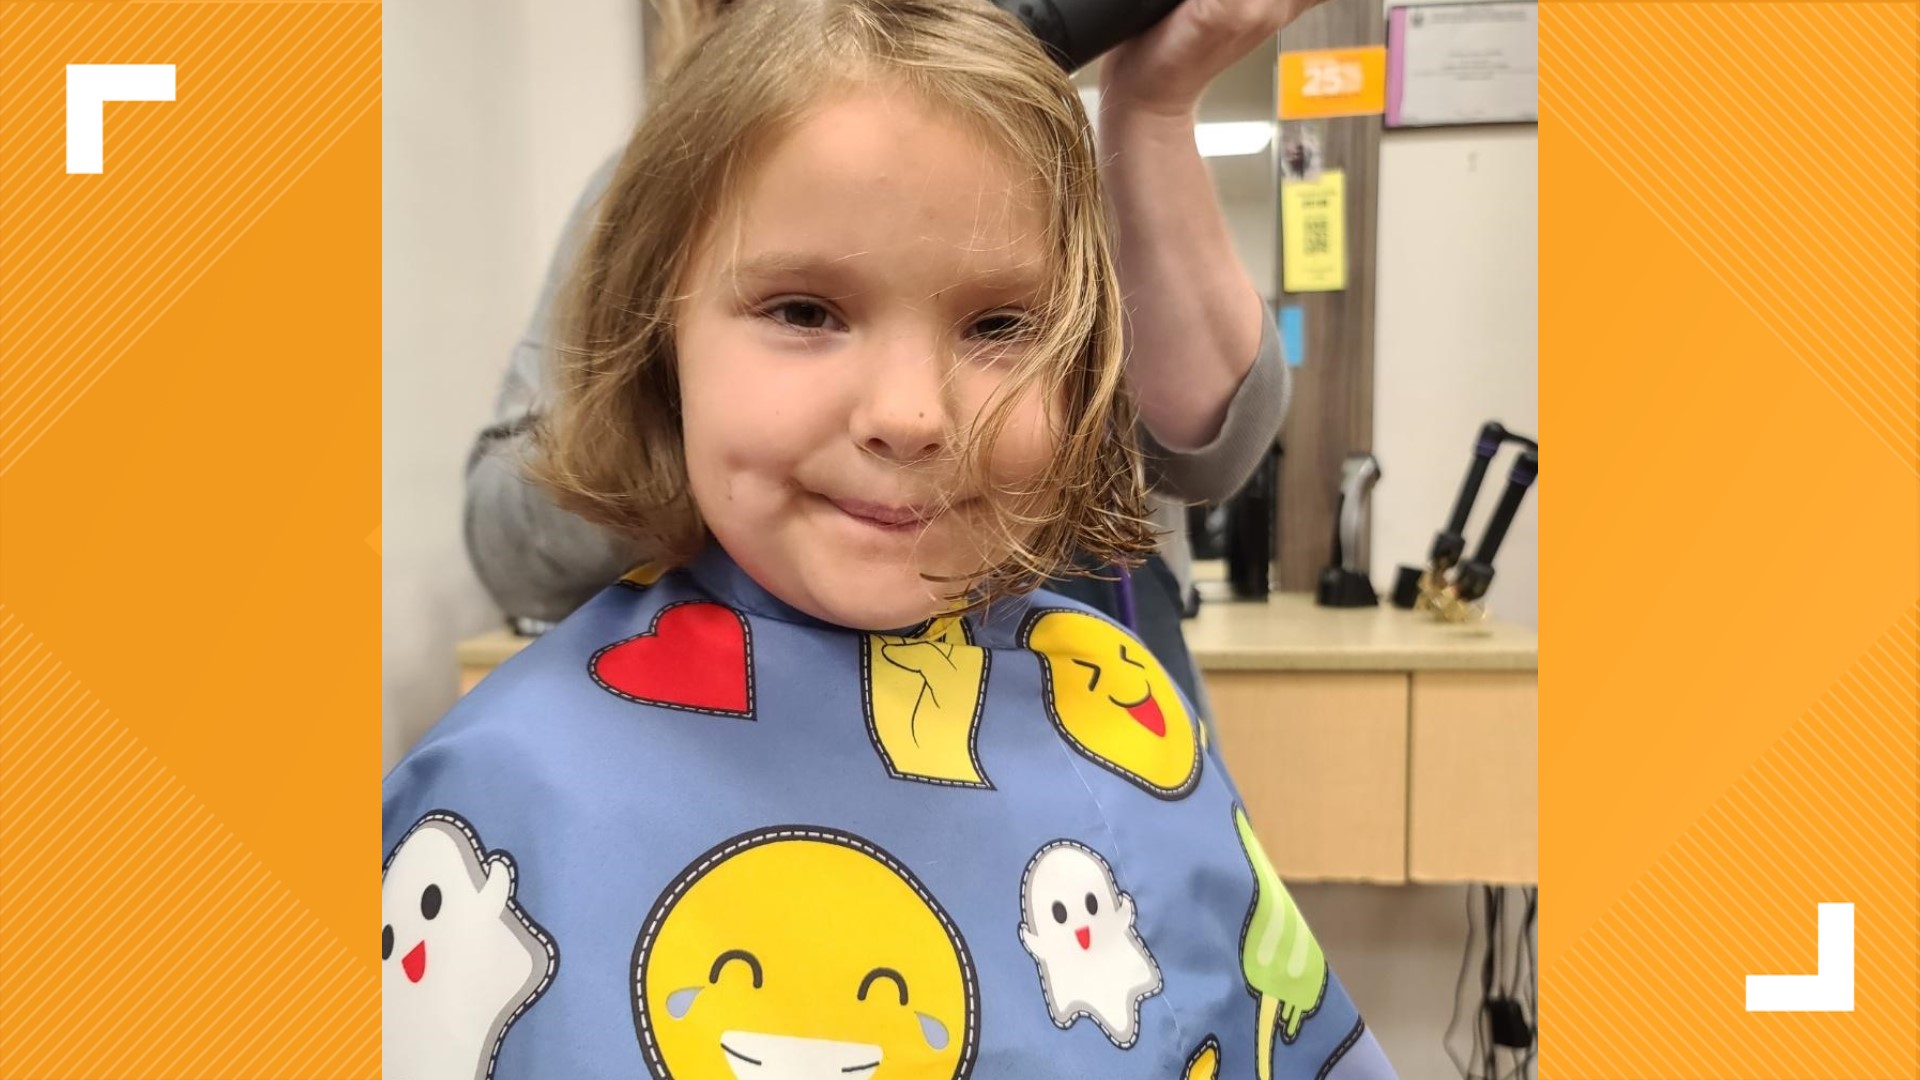 Lily Norton, of Chesterville, spent 12 hours in surgery and received more than 1,000 stitches after being attacked by a dog Saturday, her mother said.